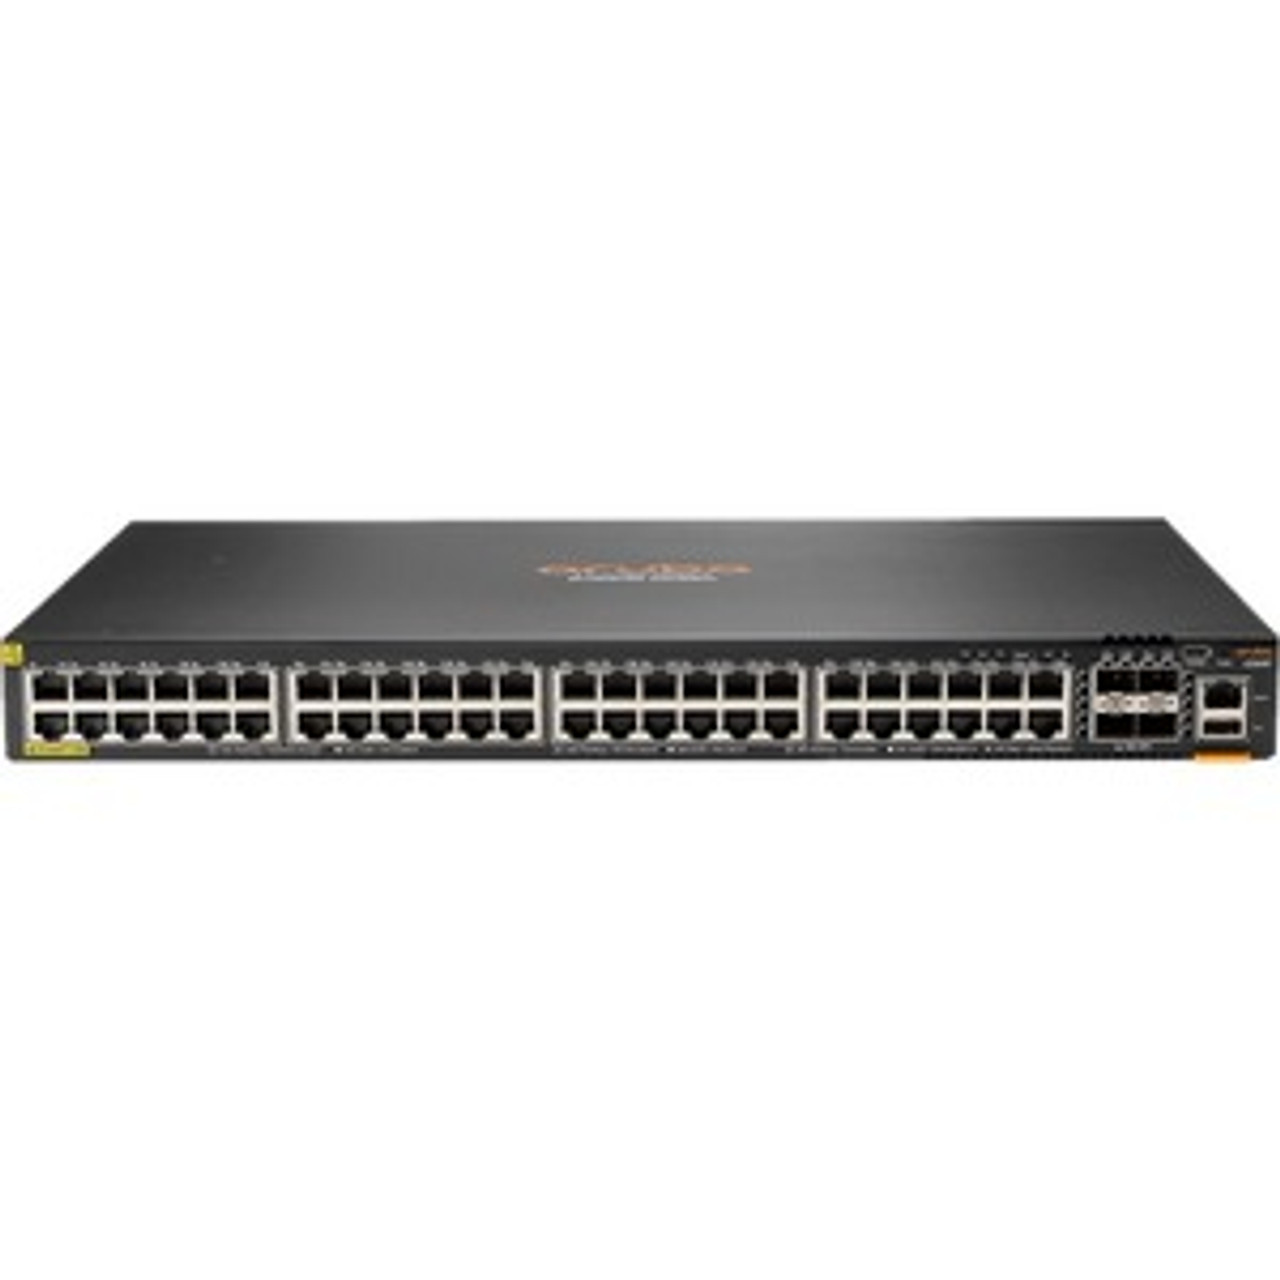 JL727A#ABA Aruba 6200F 48G Class4 PoE 4SFP+ 370W Switch - 48 Ports - Manageable - 3 Layer Supported - Modular - 370 W PoE Budget - Twisted Pair, Optical Fiber